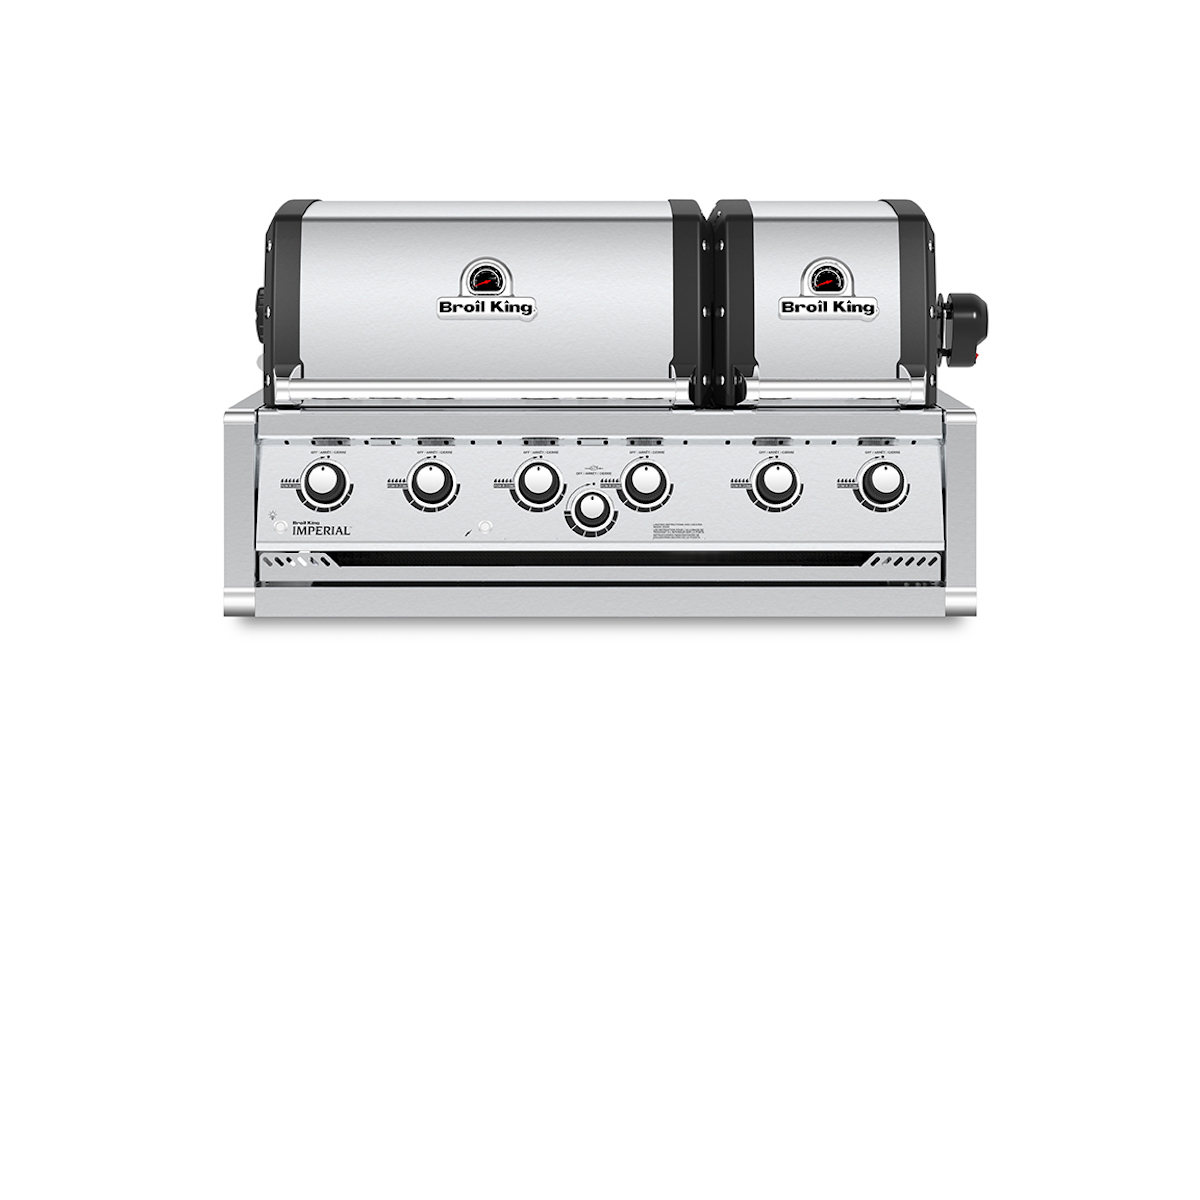 BROIL KING IMPERIAL S670 XL PRO Built In Grillkopf 